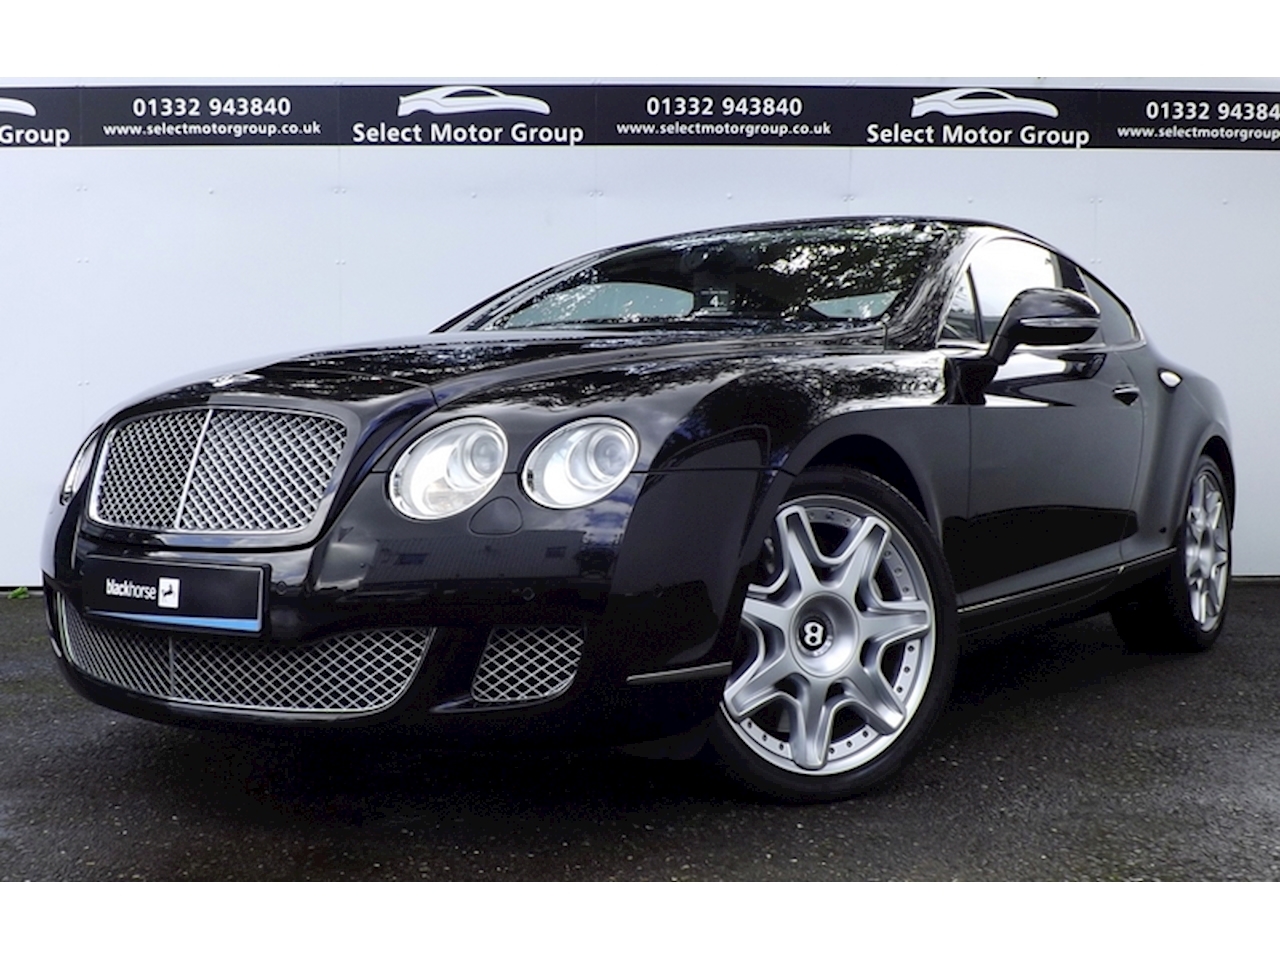 Continental GT 6.0 W12 Coupe Automatic Petrol